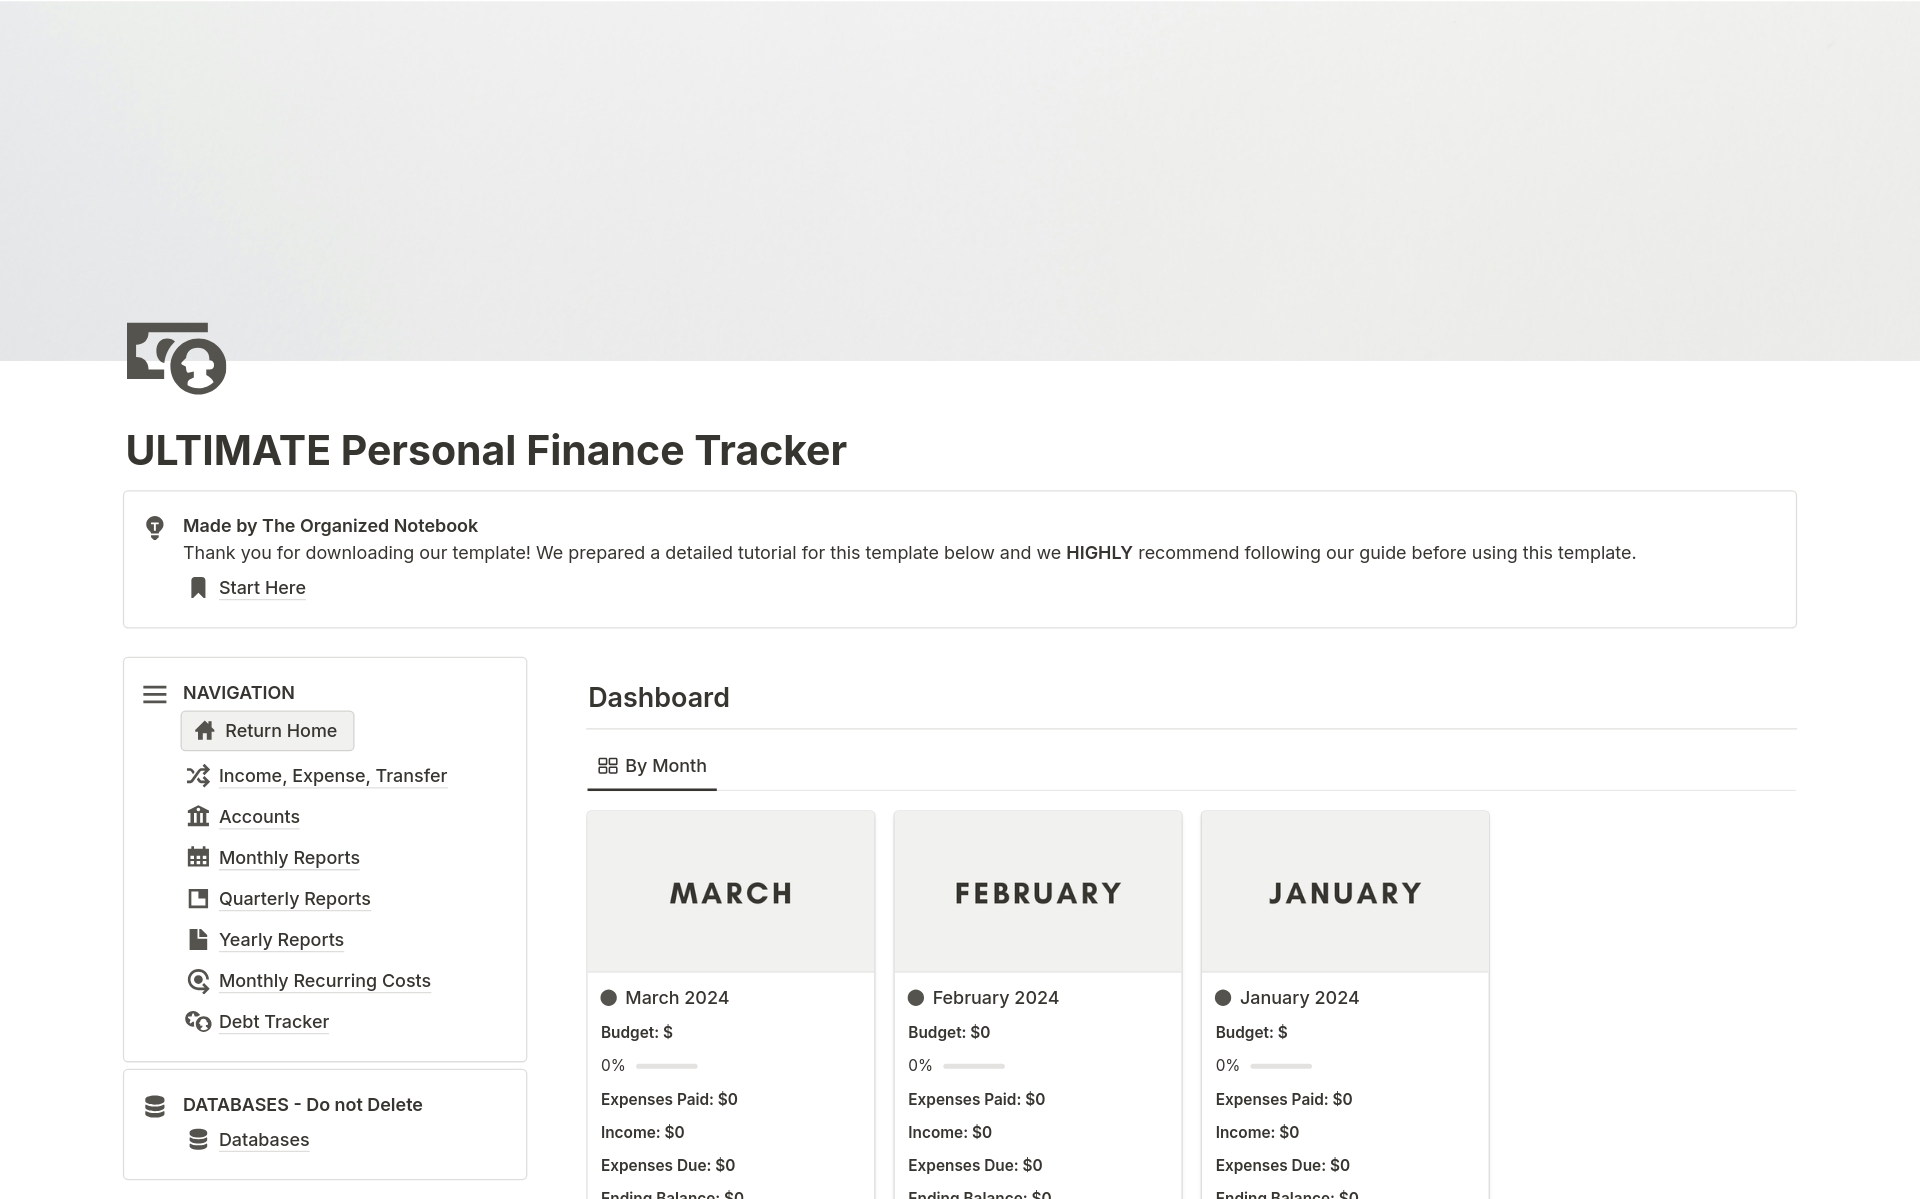 💵💰 Are you tracking your money and controlling your finances? If not, this template can be an incredible tool to help you manage your finances effectively. 